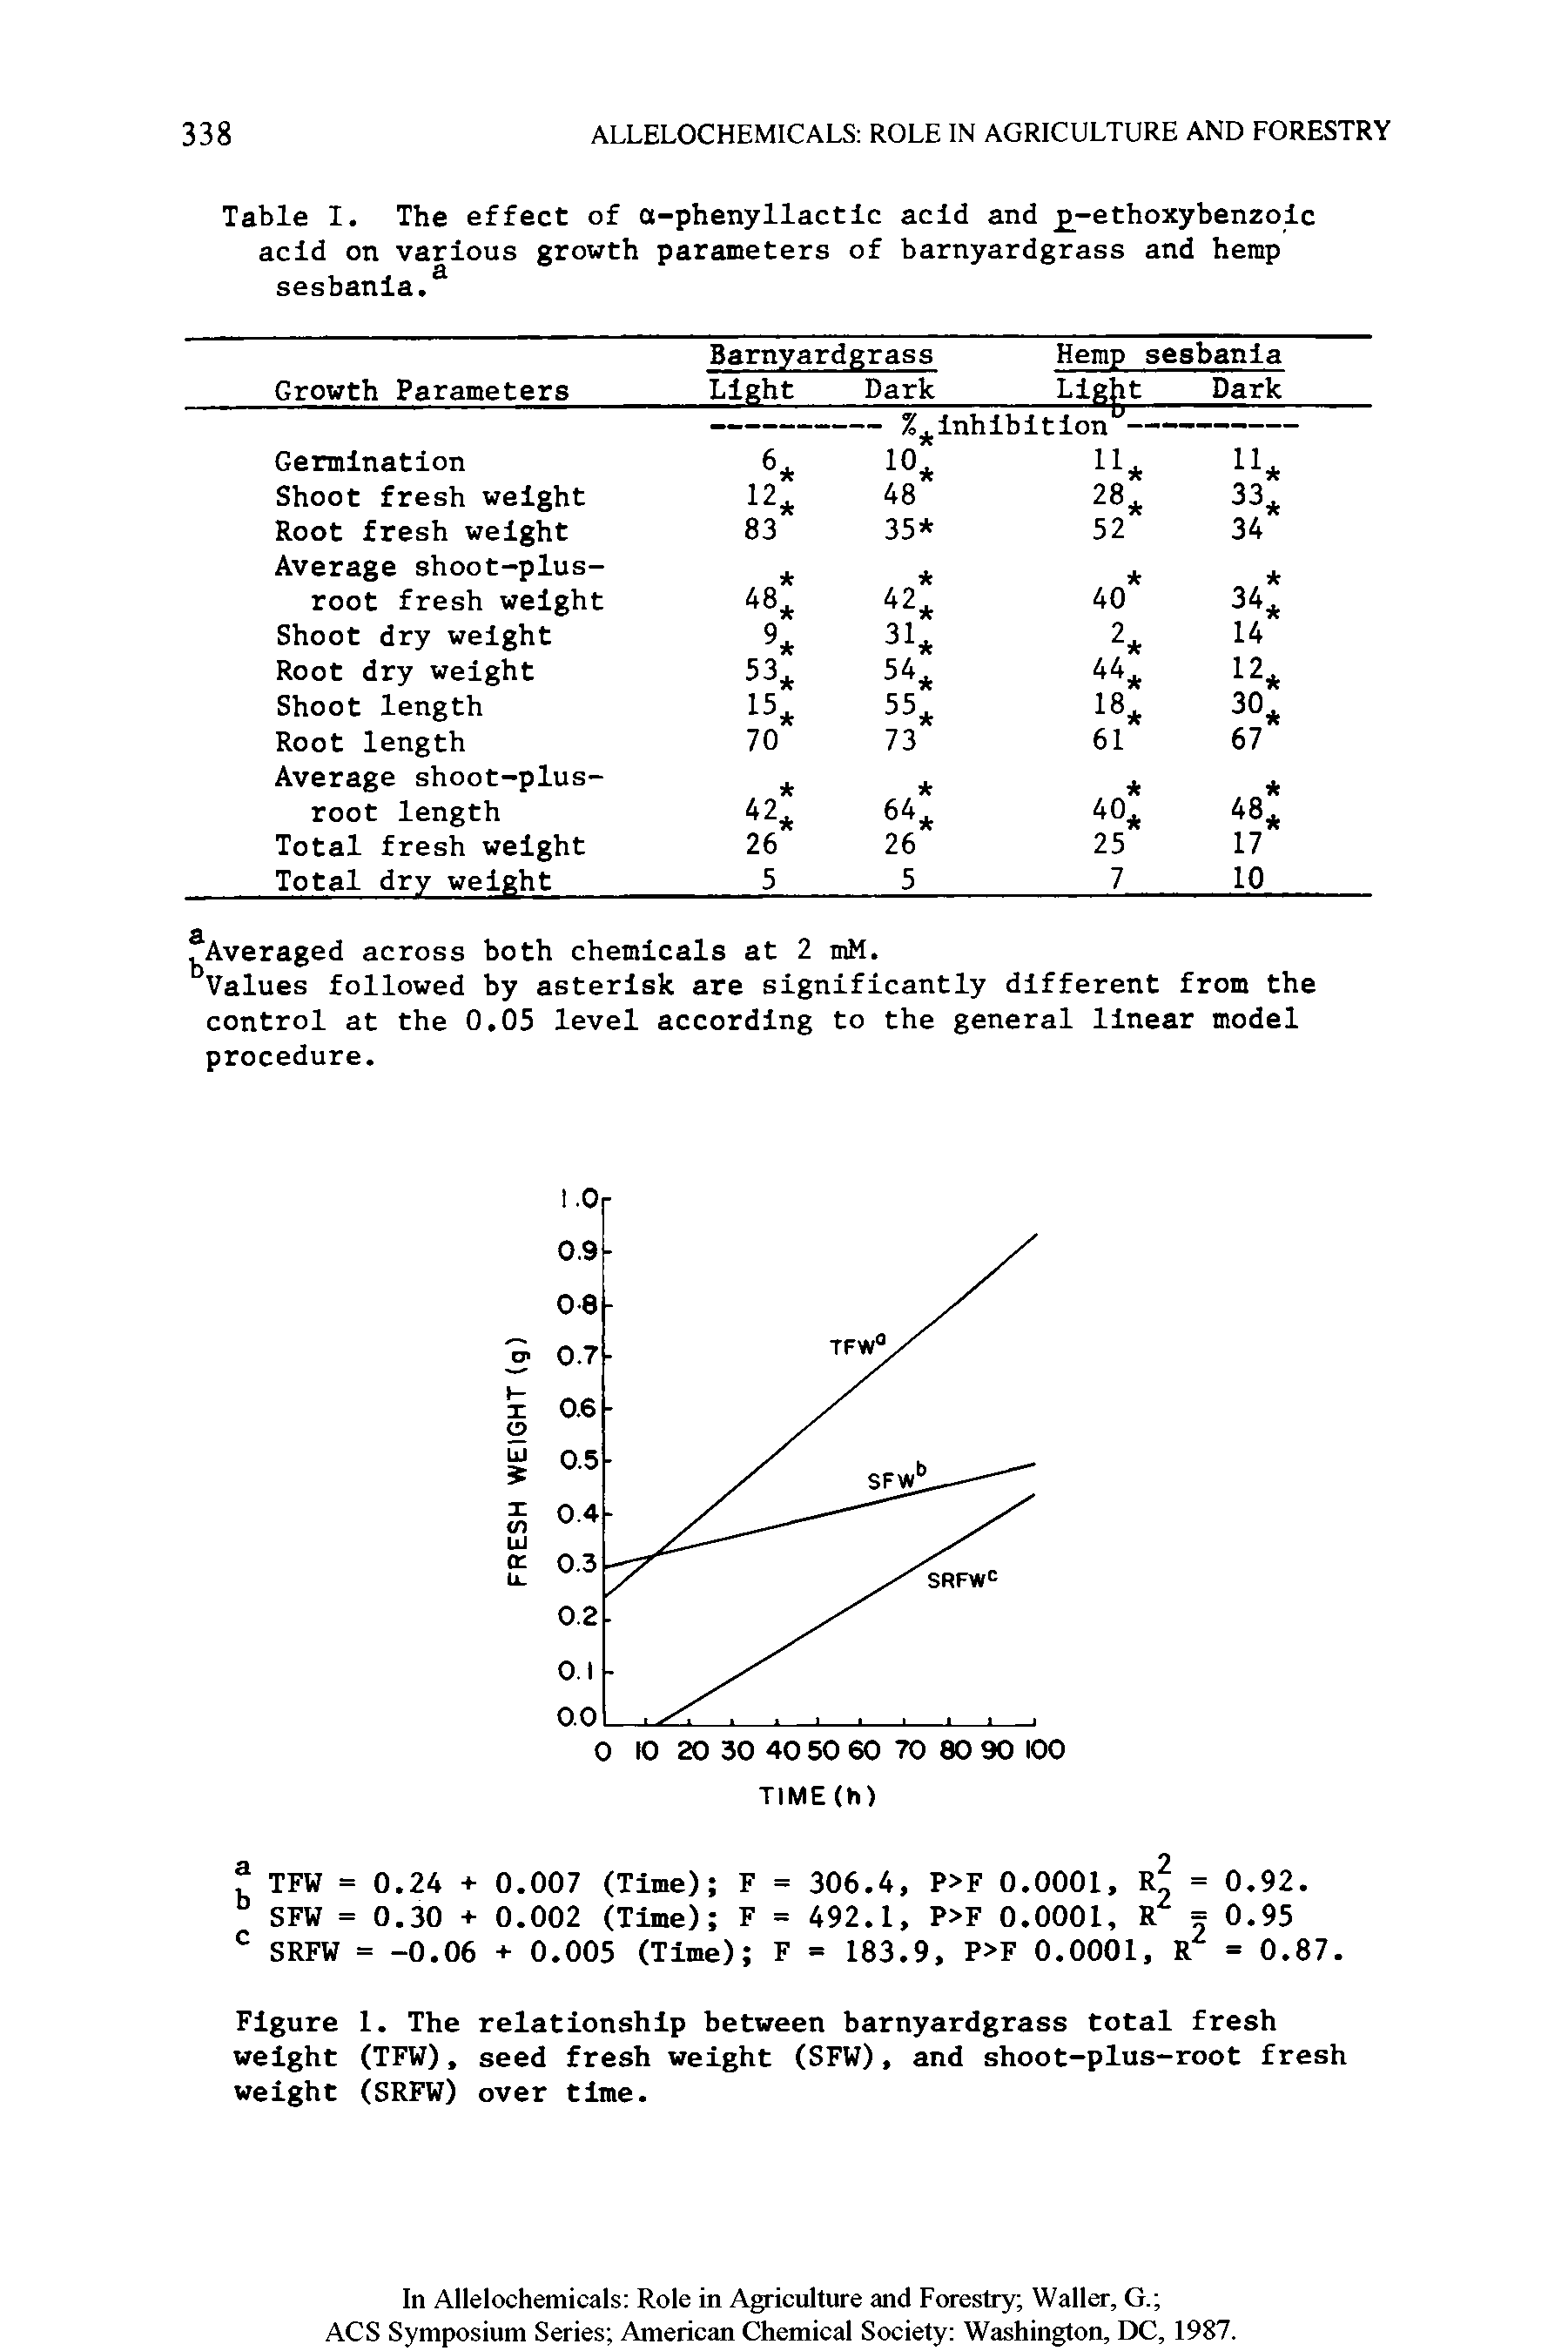 Table I. The effect of a-phenyllactlc acid and -ethoxybenzolc acid on various growth parameters of barnyardgrass and hemp sesbanla.